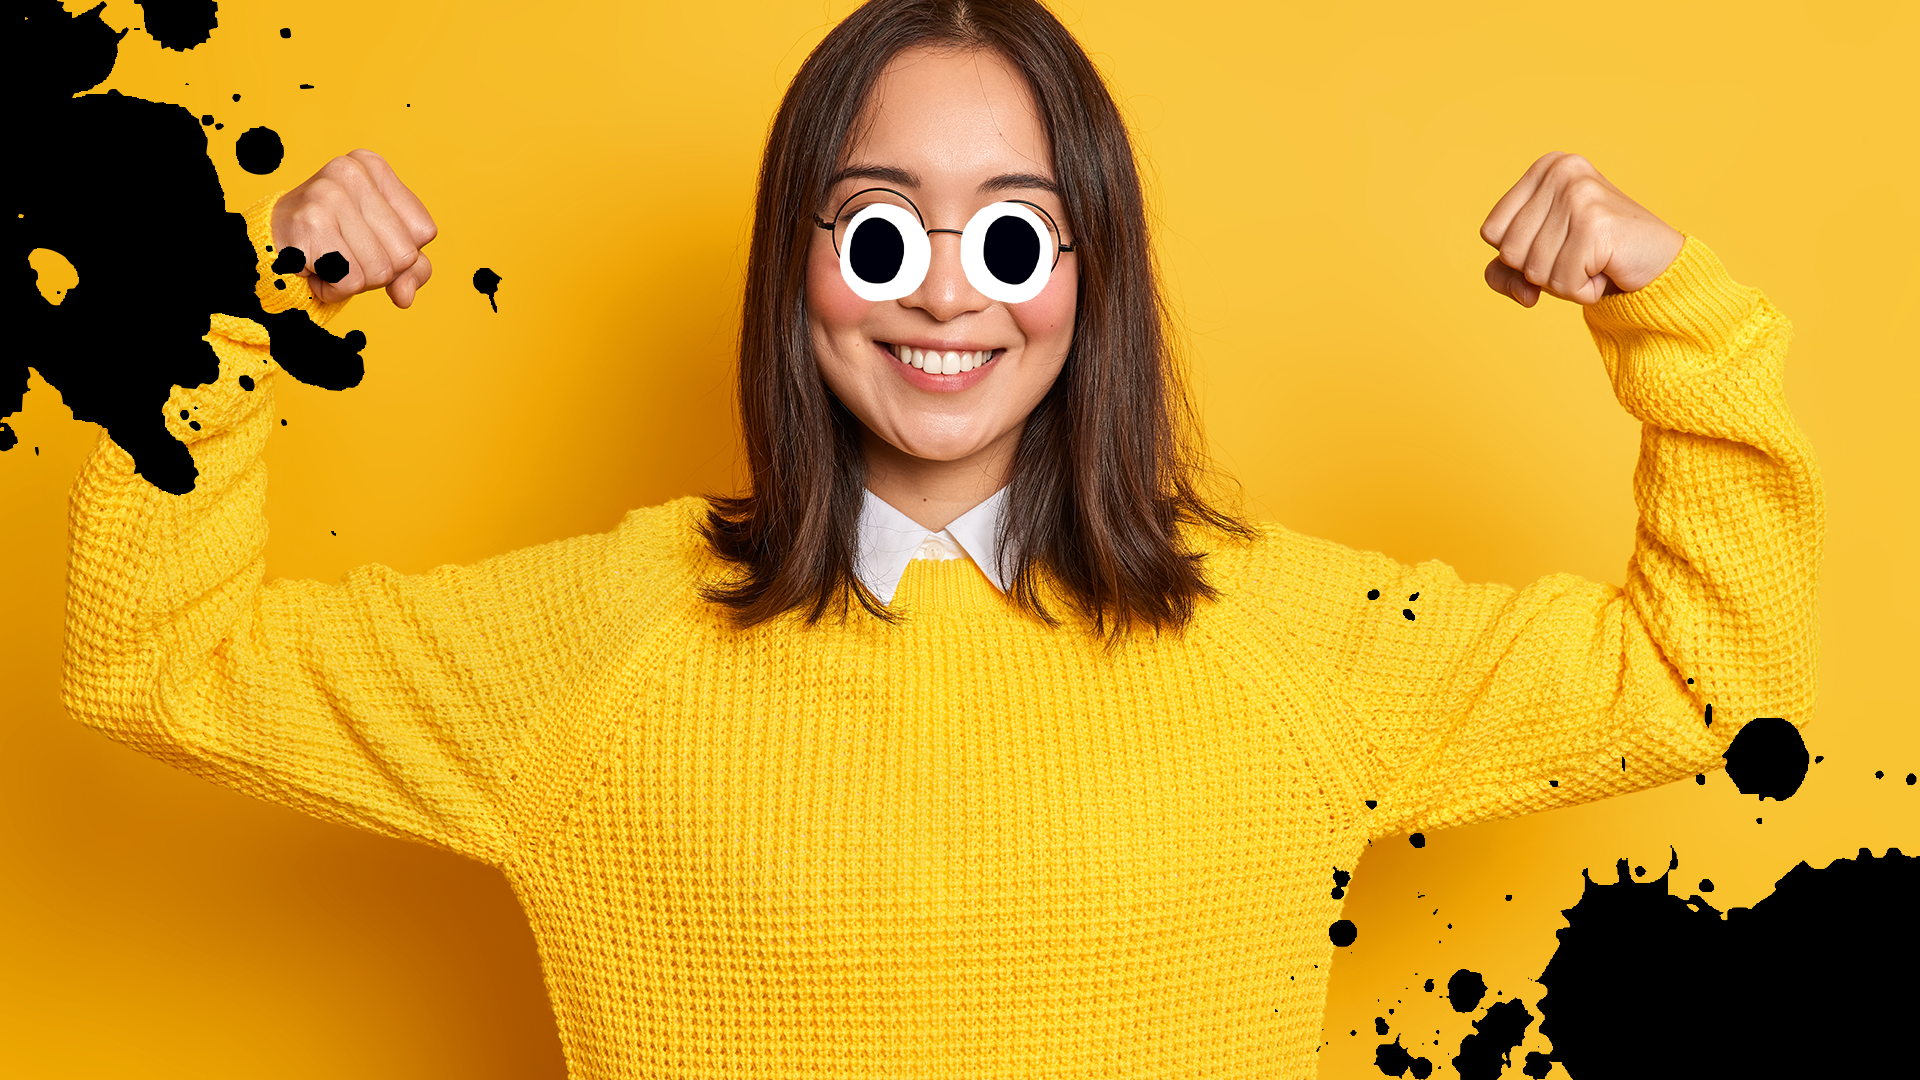 Woman looking strong on yellow background with splats